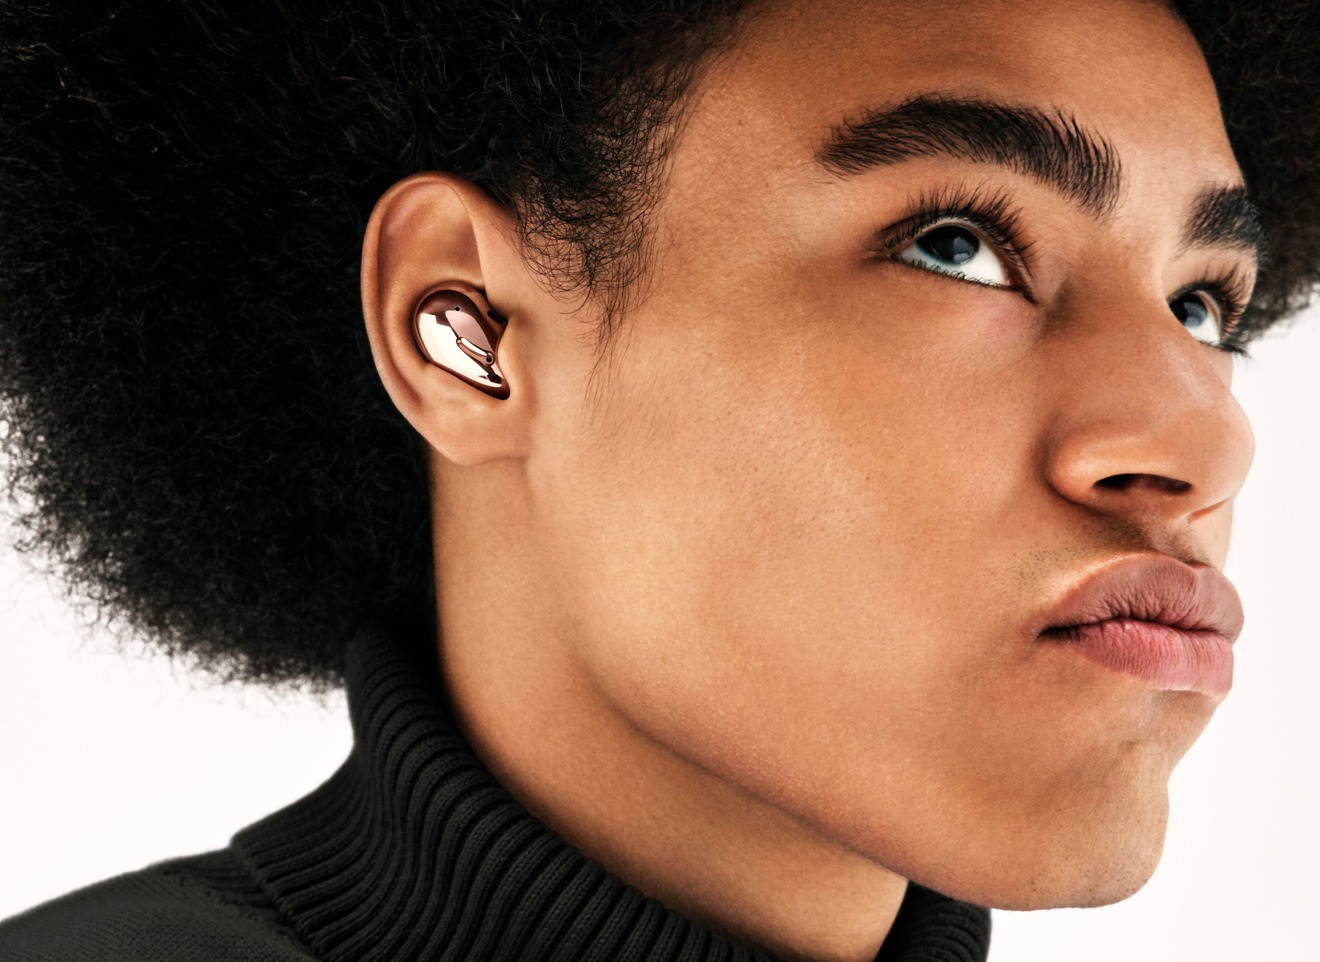 The Samsung Galaxy Buds Live are designed to sit within the ear